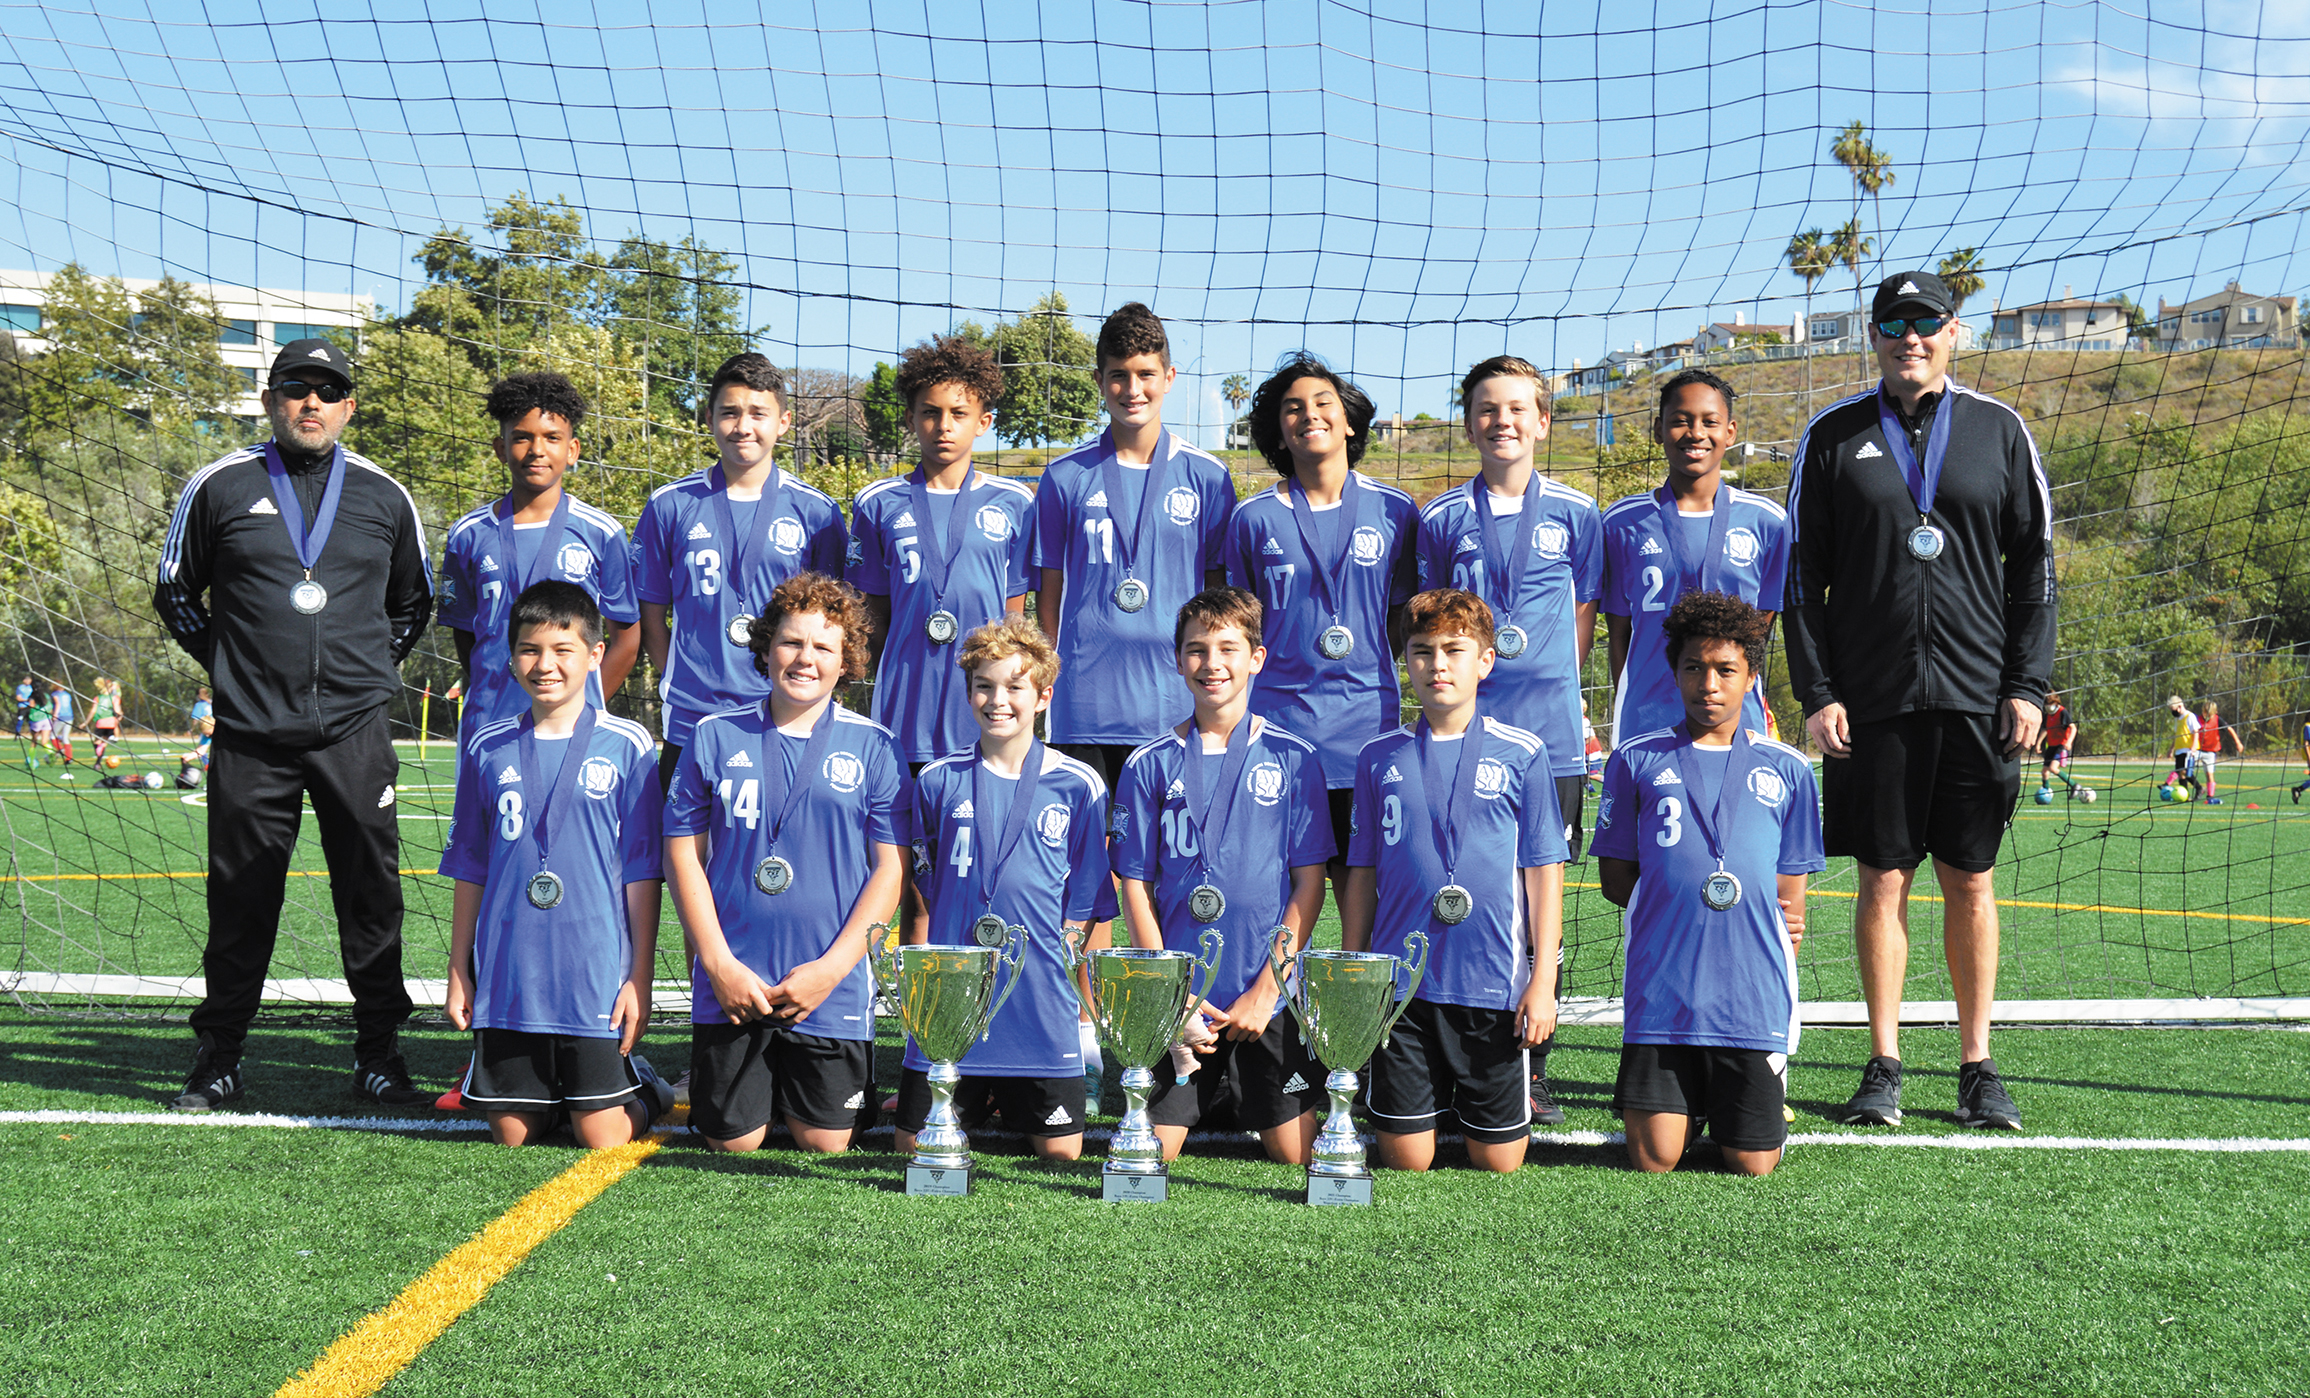 Westchester AYSO boys soccer team captures championship for historic third consecutive season